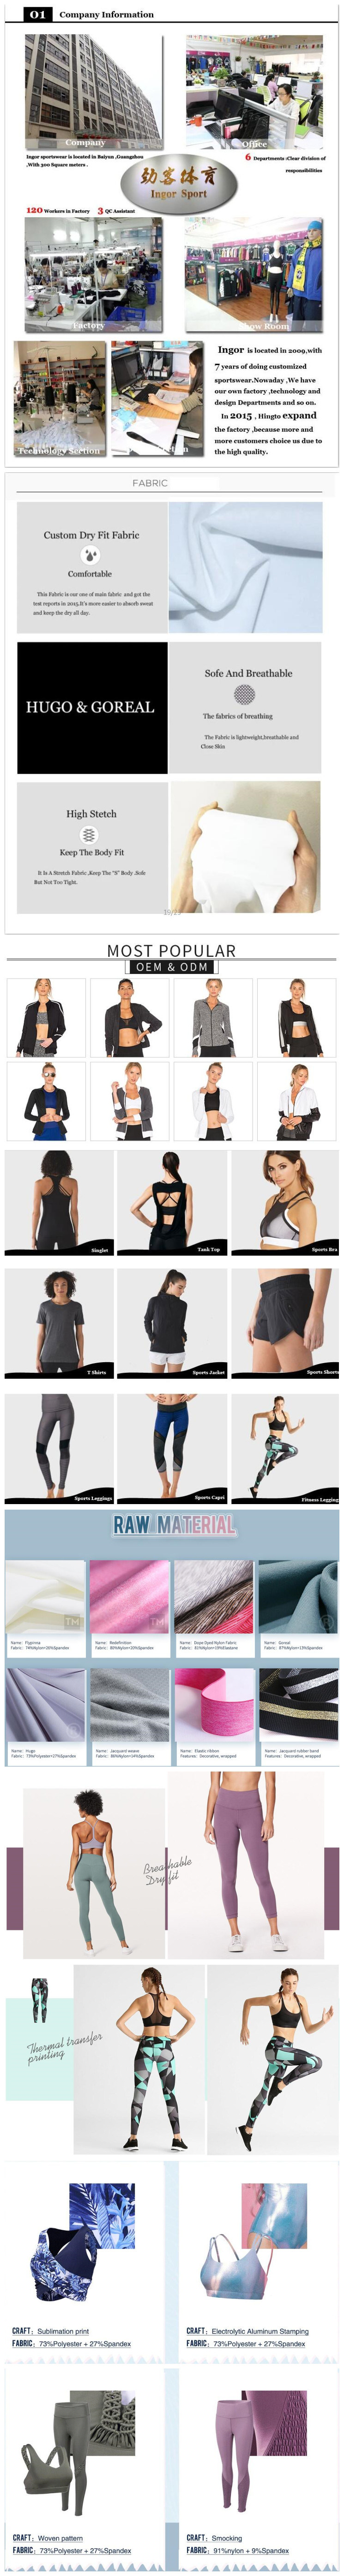 Custom Made Design Stylish Leggings and Sports Bra, Mesh and Zipper Insert Crop Top and Tights